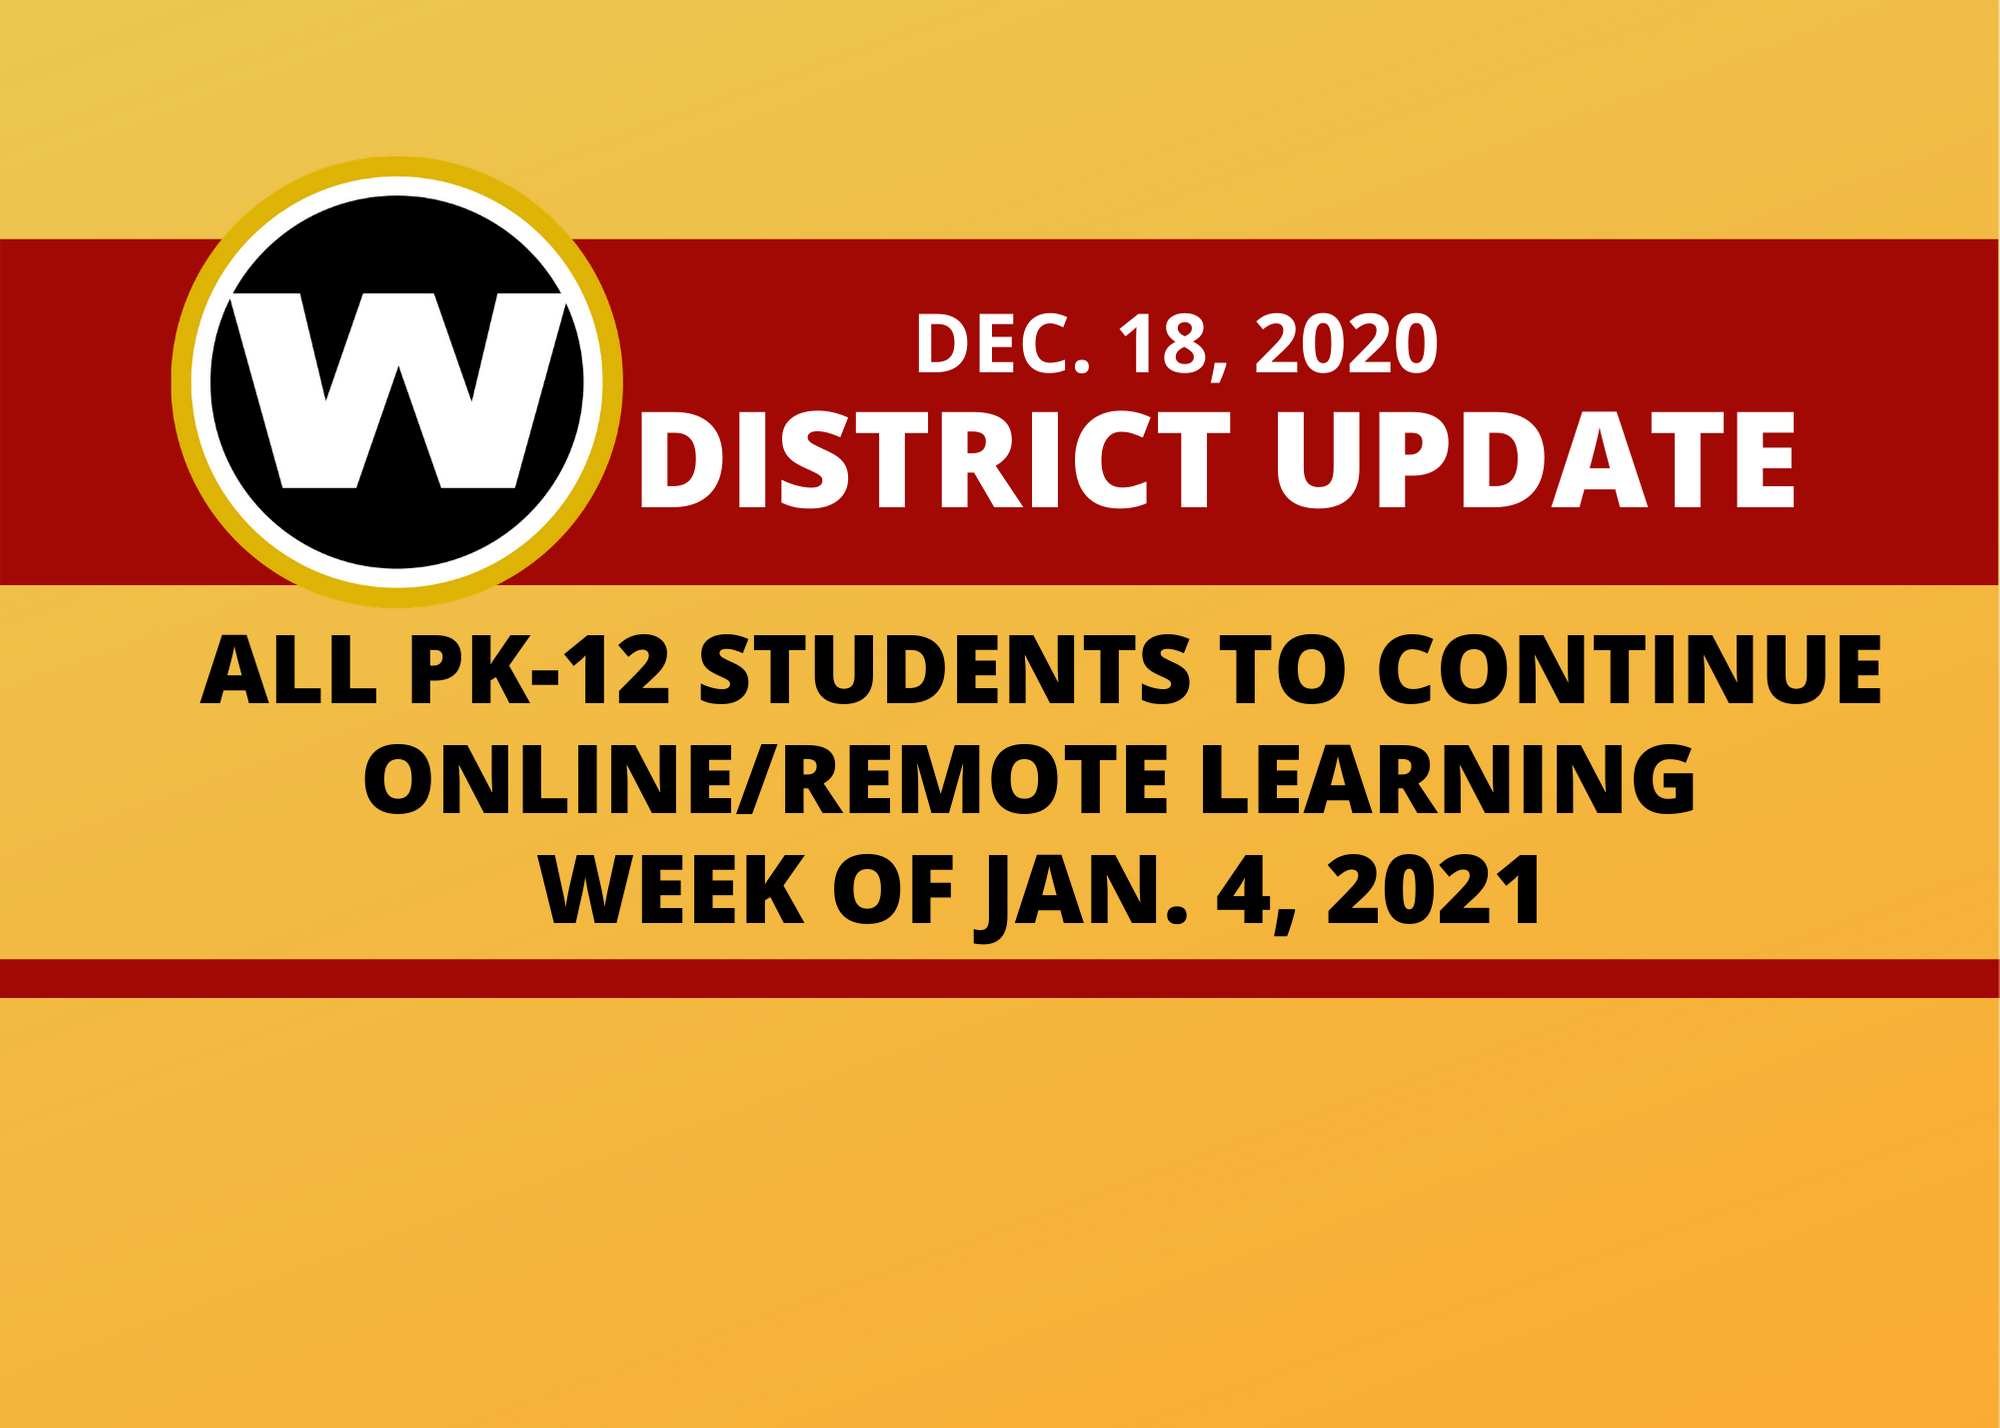 WCSD to continue online/remote learning week of Jan. 4